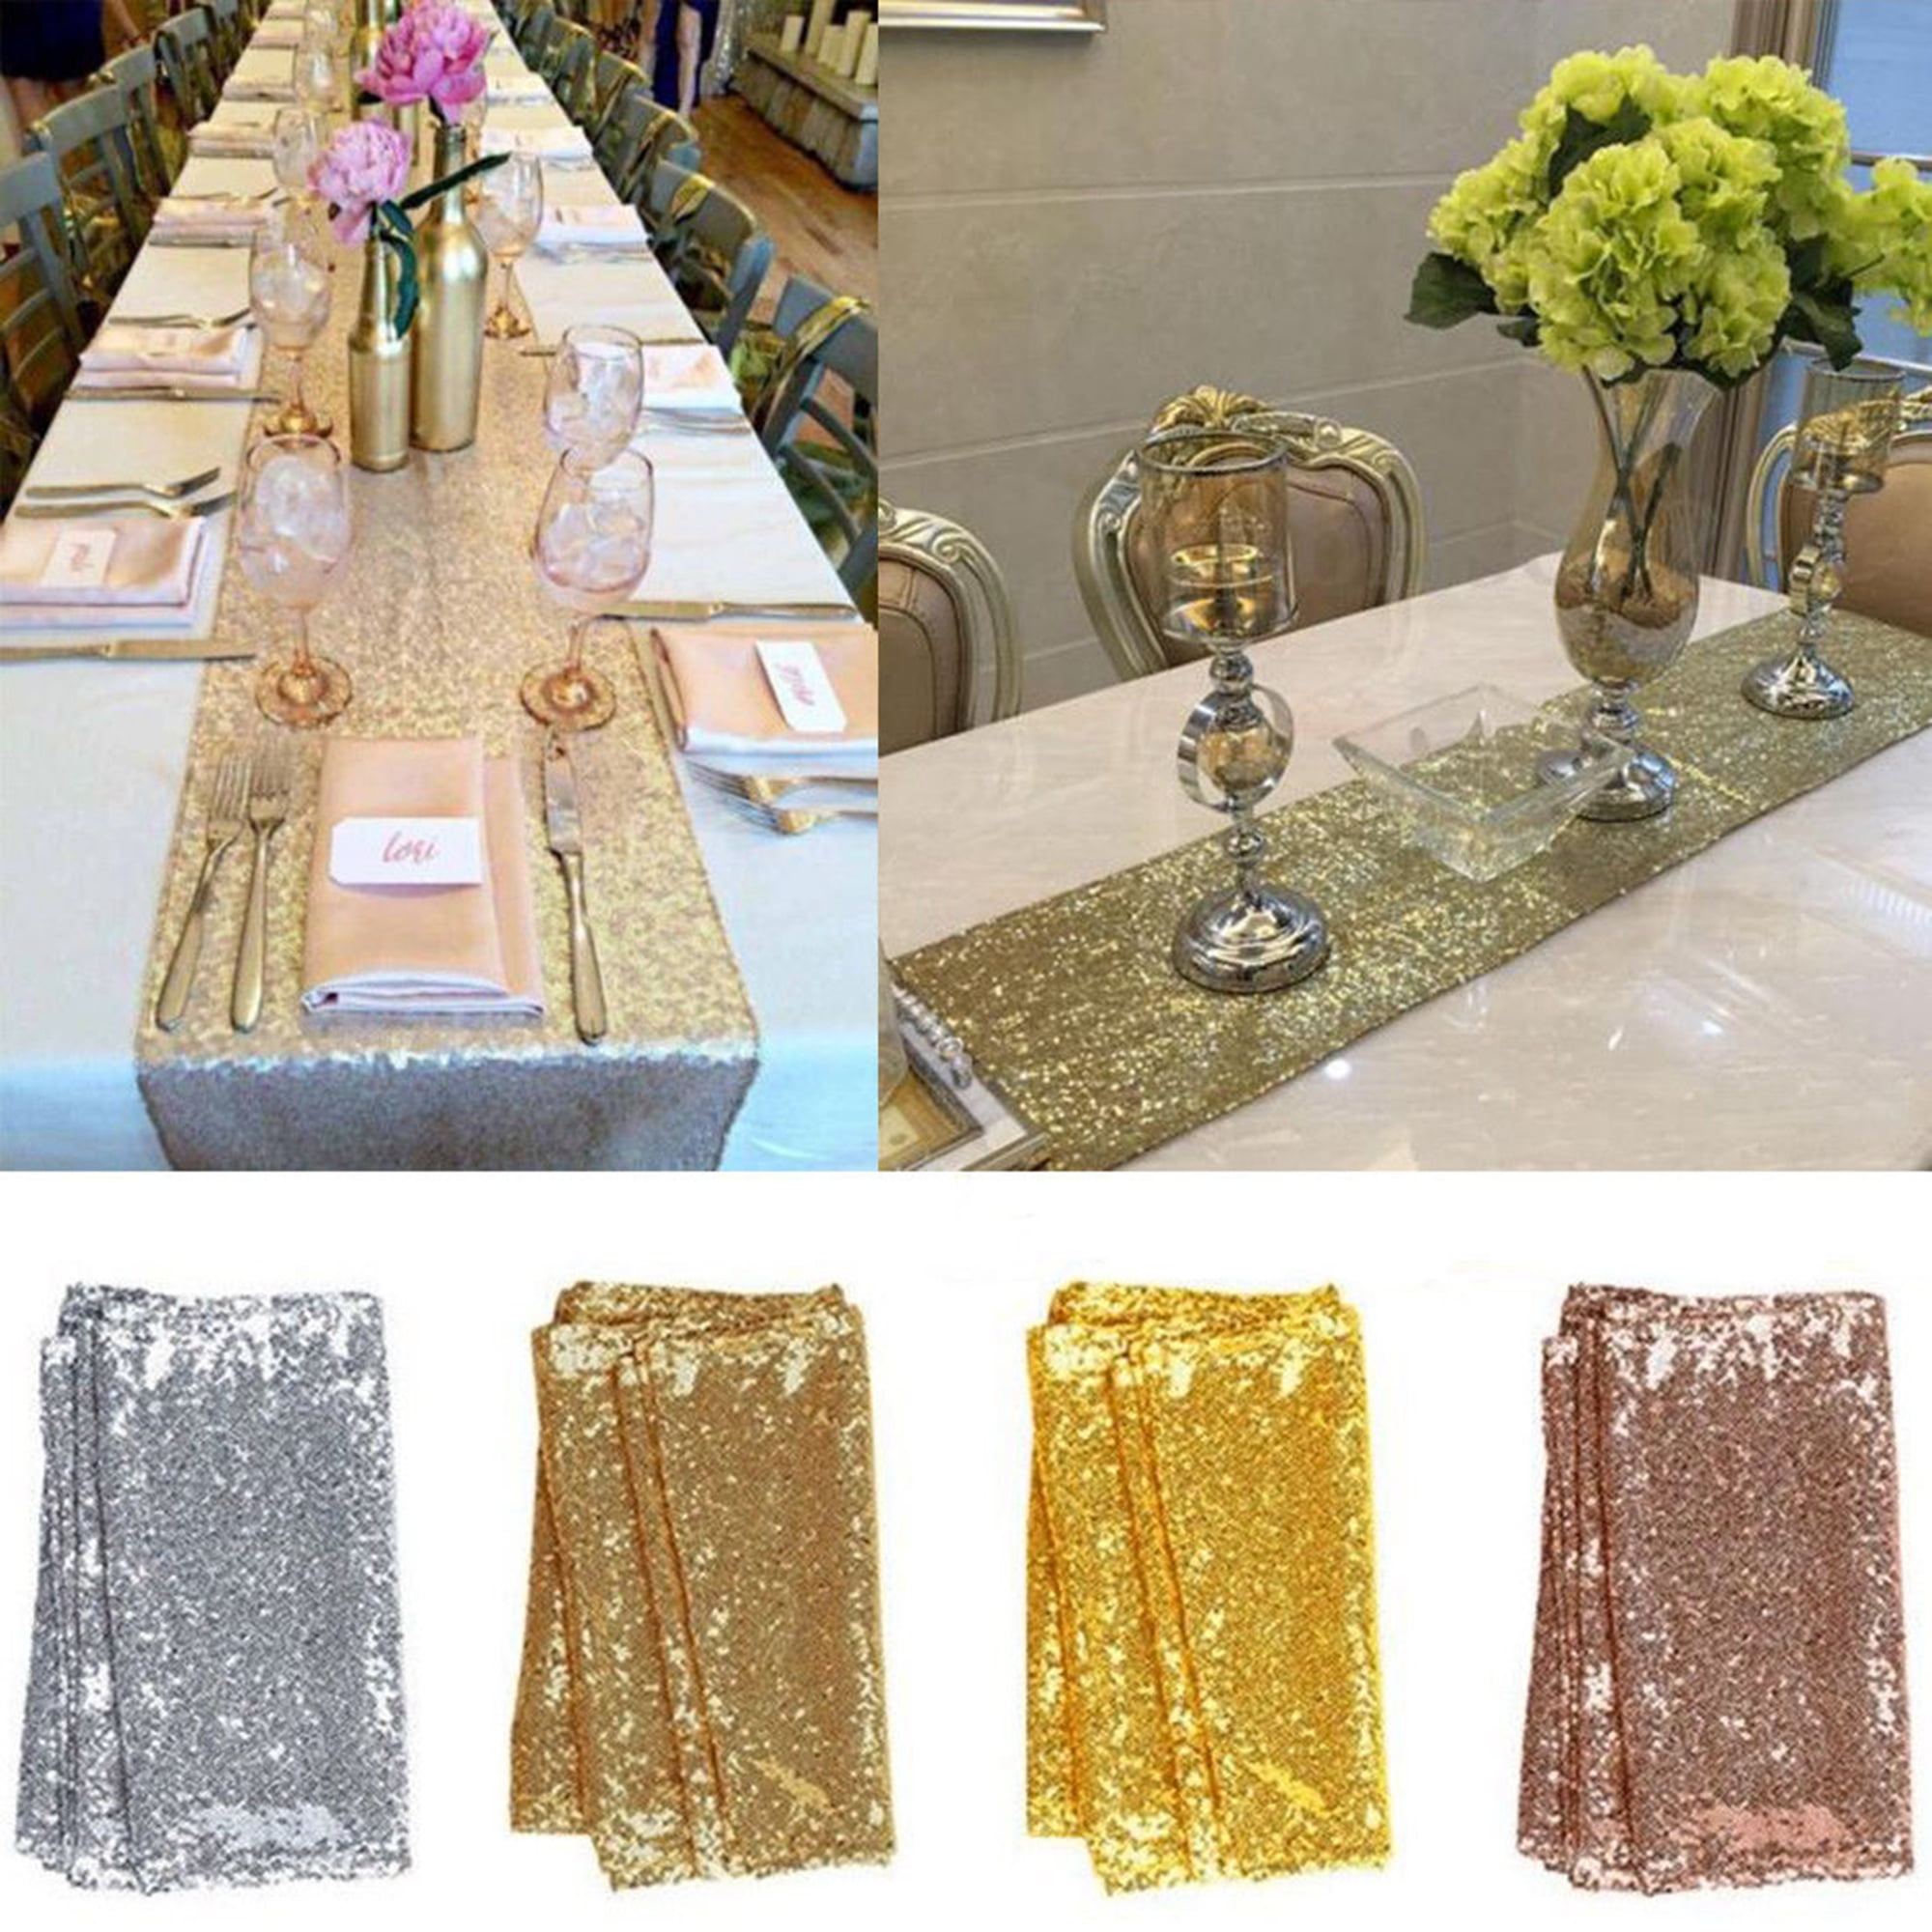 gold color Sevenfly Sequin Table Runners Glitter Table Runner Party Supplies Fabric Decorations For Wedding Birthday Baby Shower